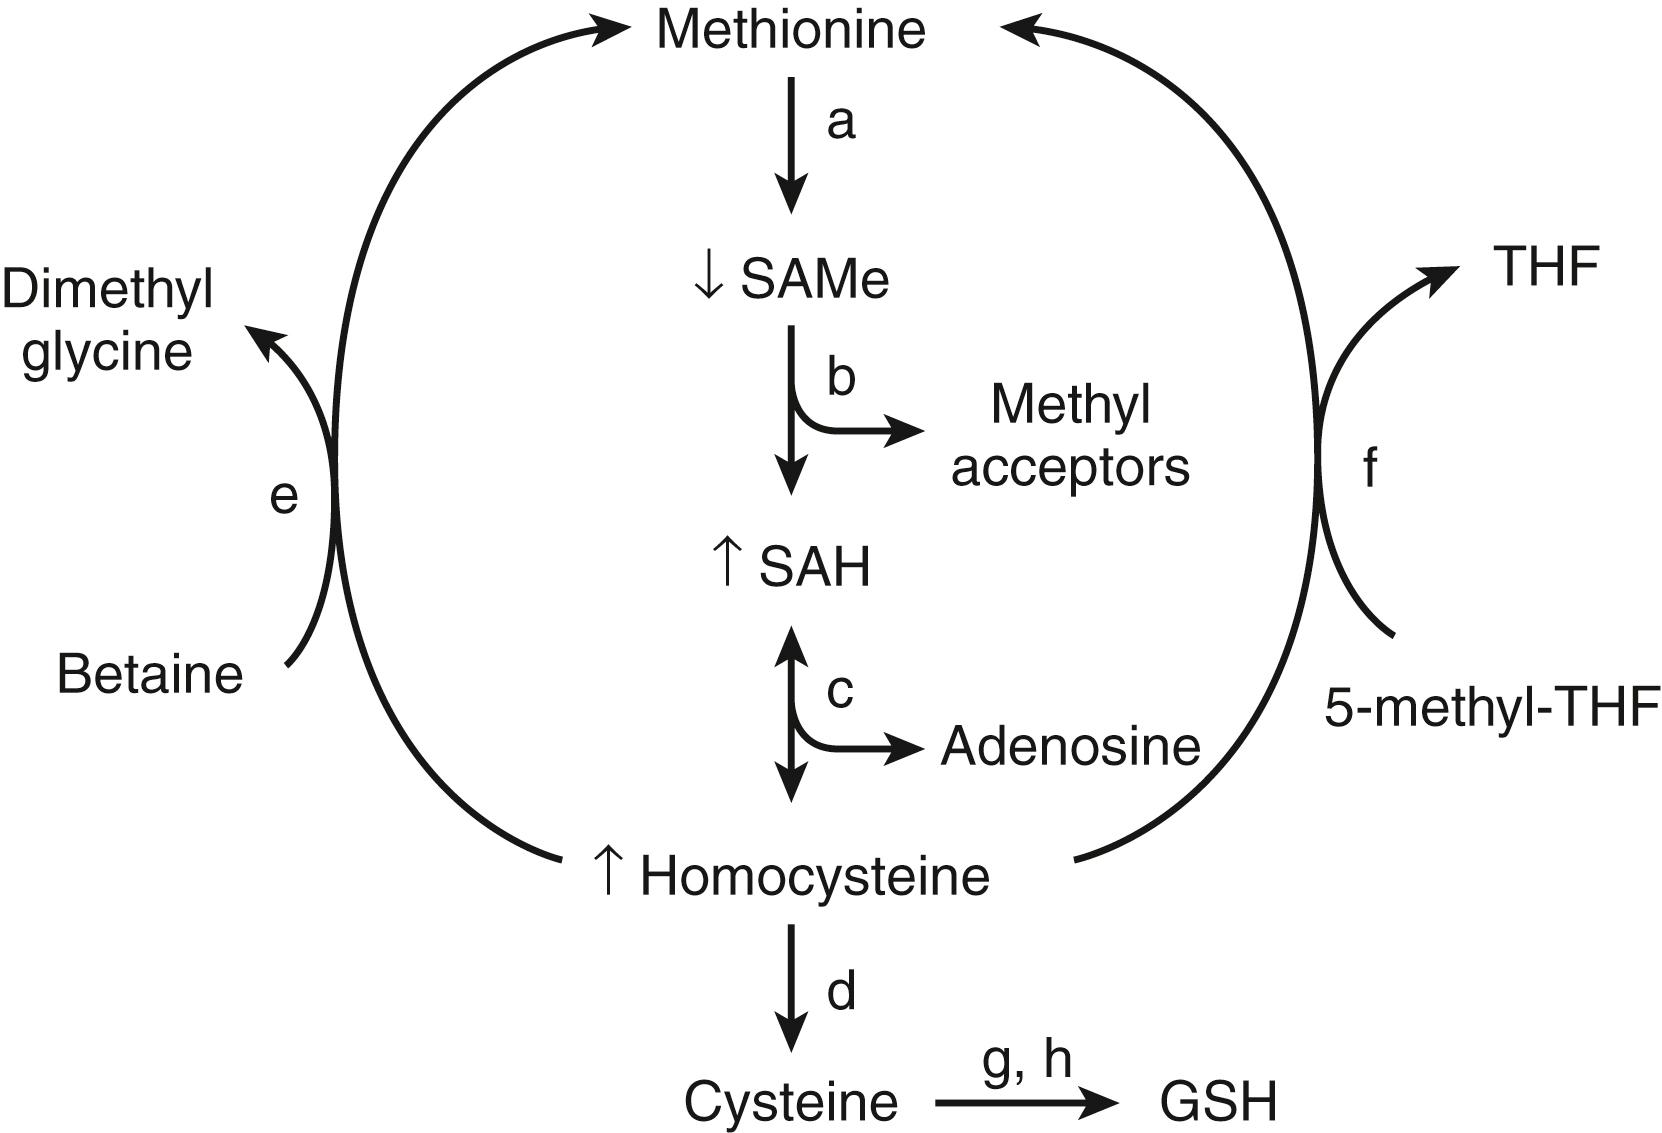 Fig. 86.3, Hepatic methionine metabolism. Chronic alcohol consumption causes S-adenosylmethionine ( SAMe ) deficiency and an increase in homocysteine and S-adenosylhomocysteine ( SAH ) levels. a, methionine adenosyltransferase. b, enzymes involved in transmethylation reactions, including phosphatidylethanolamine N-methyltransferase. c, SAH hydrolase. d, cystathionine B-synthase. e, Betaine-homocysteine methyltransfe rase. f, Methionine synthetase. g, Glutamate-cysteine synthetase. h, Glutathione (GSH) synthetase. THF, tetrahydrofolate; ↑↓ , effects of alcohol.